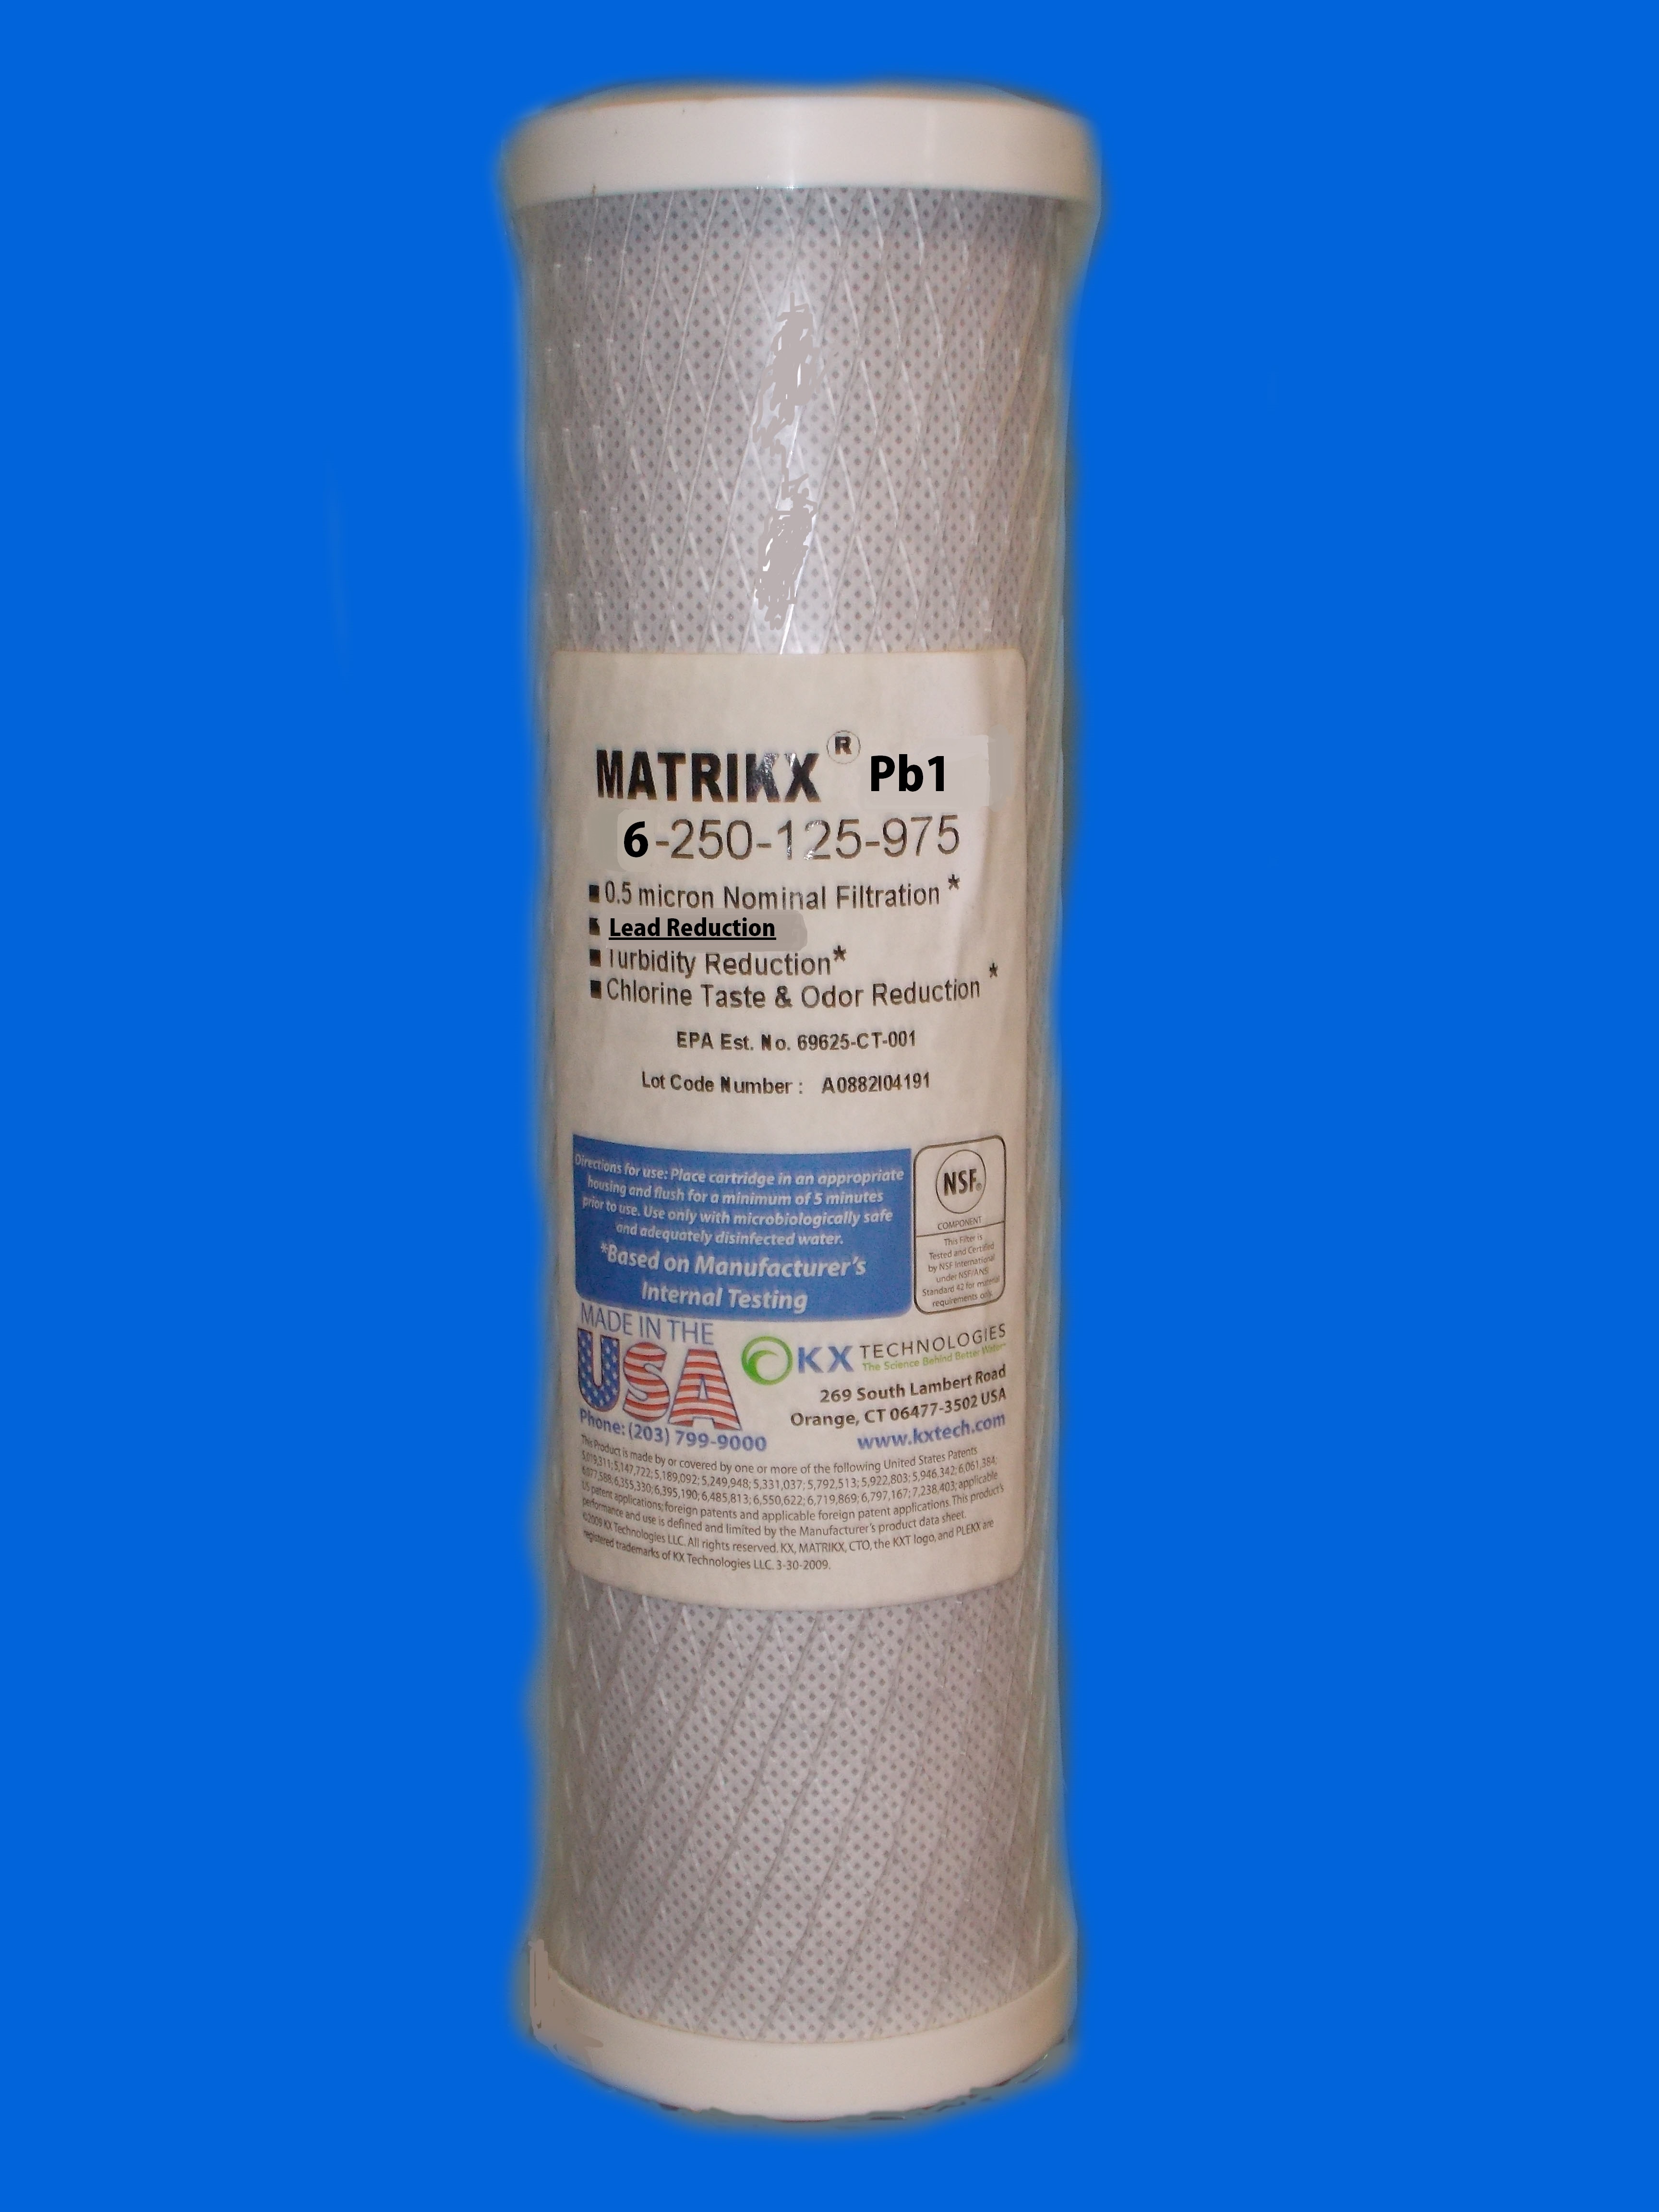 Pb1 - Replacement NSF Certified and Approved Lead Water Filter.  2.5" x 9.75"